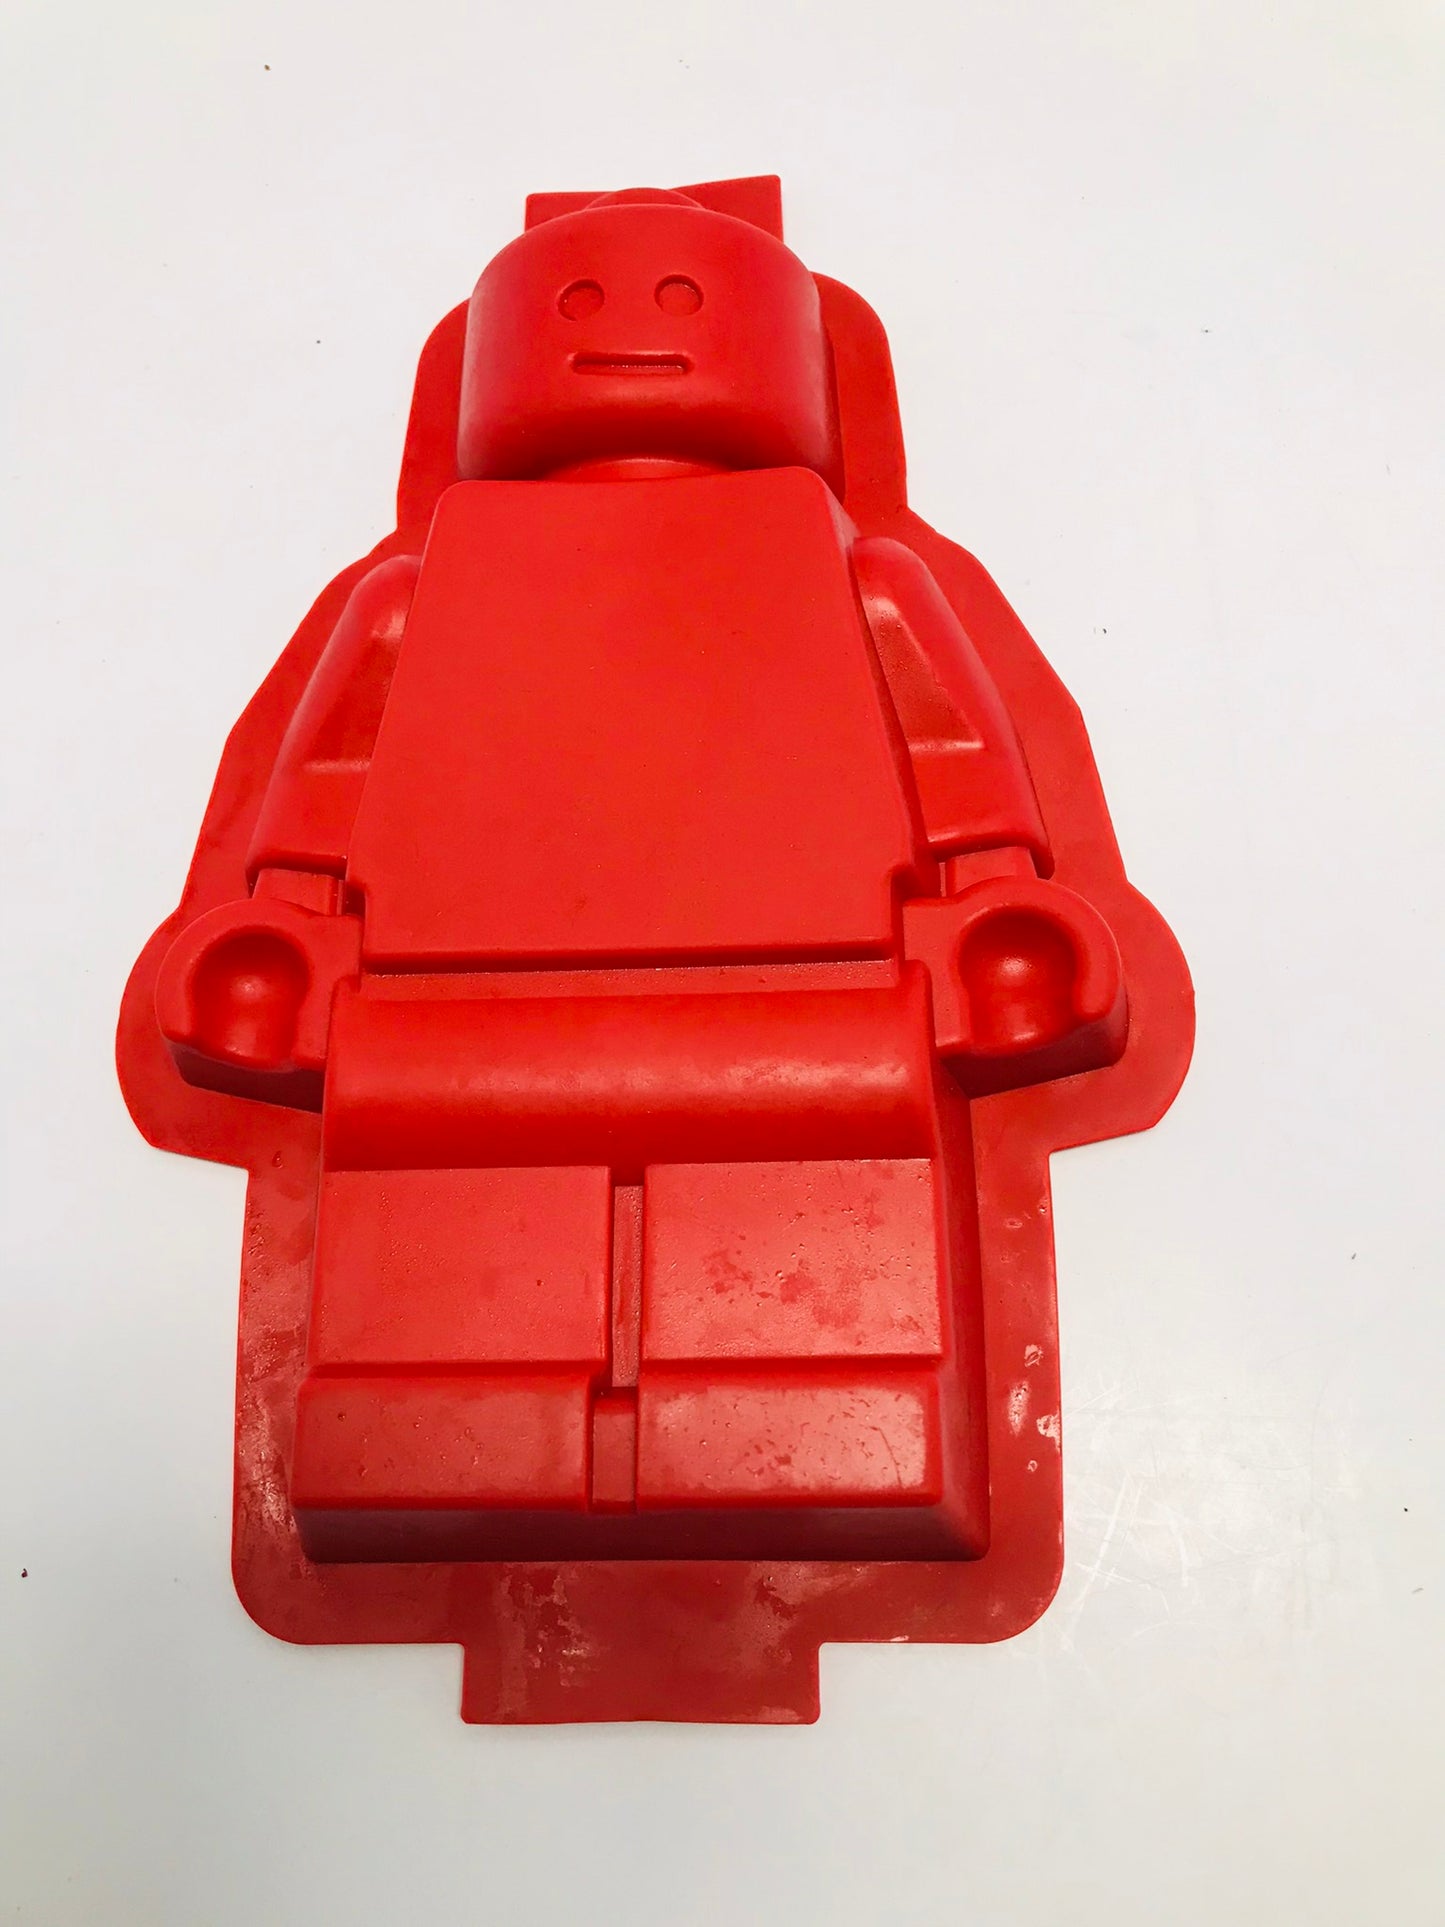 Lego Silicone Minifigure Cake Pan 12x8 inch Bricks Mold and Minifigure Mold or Ice Tray As New